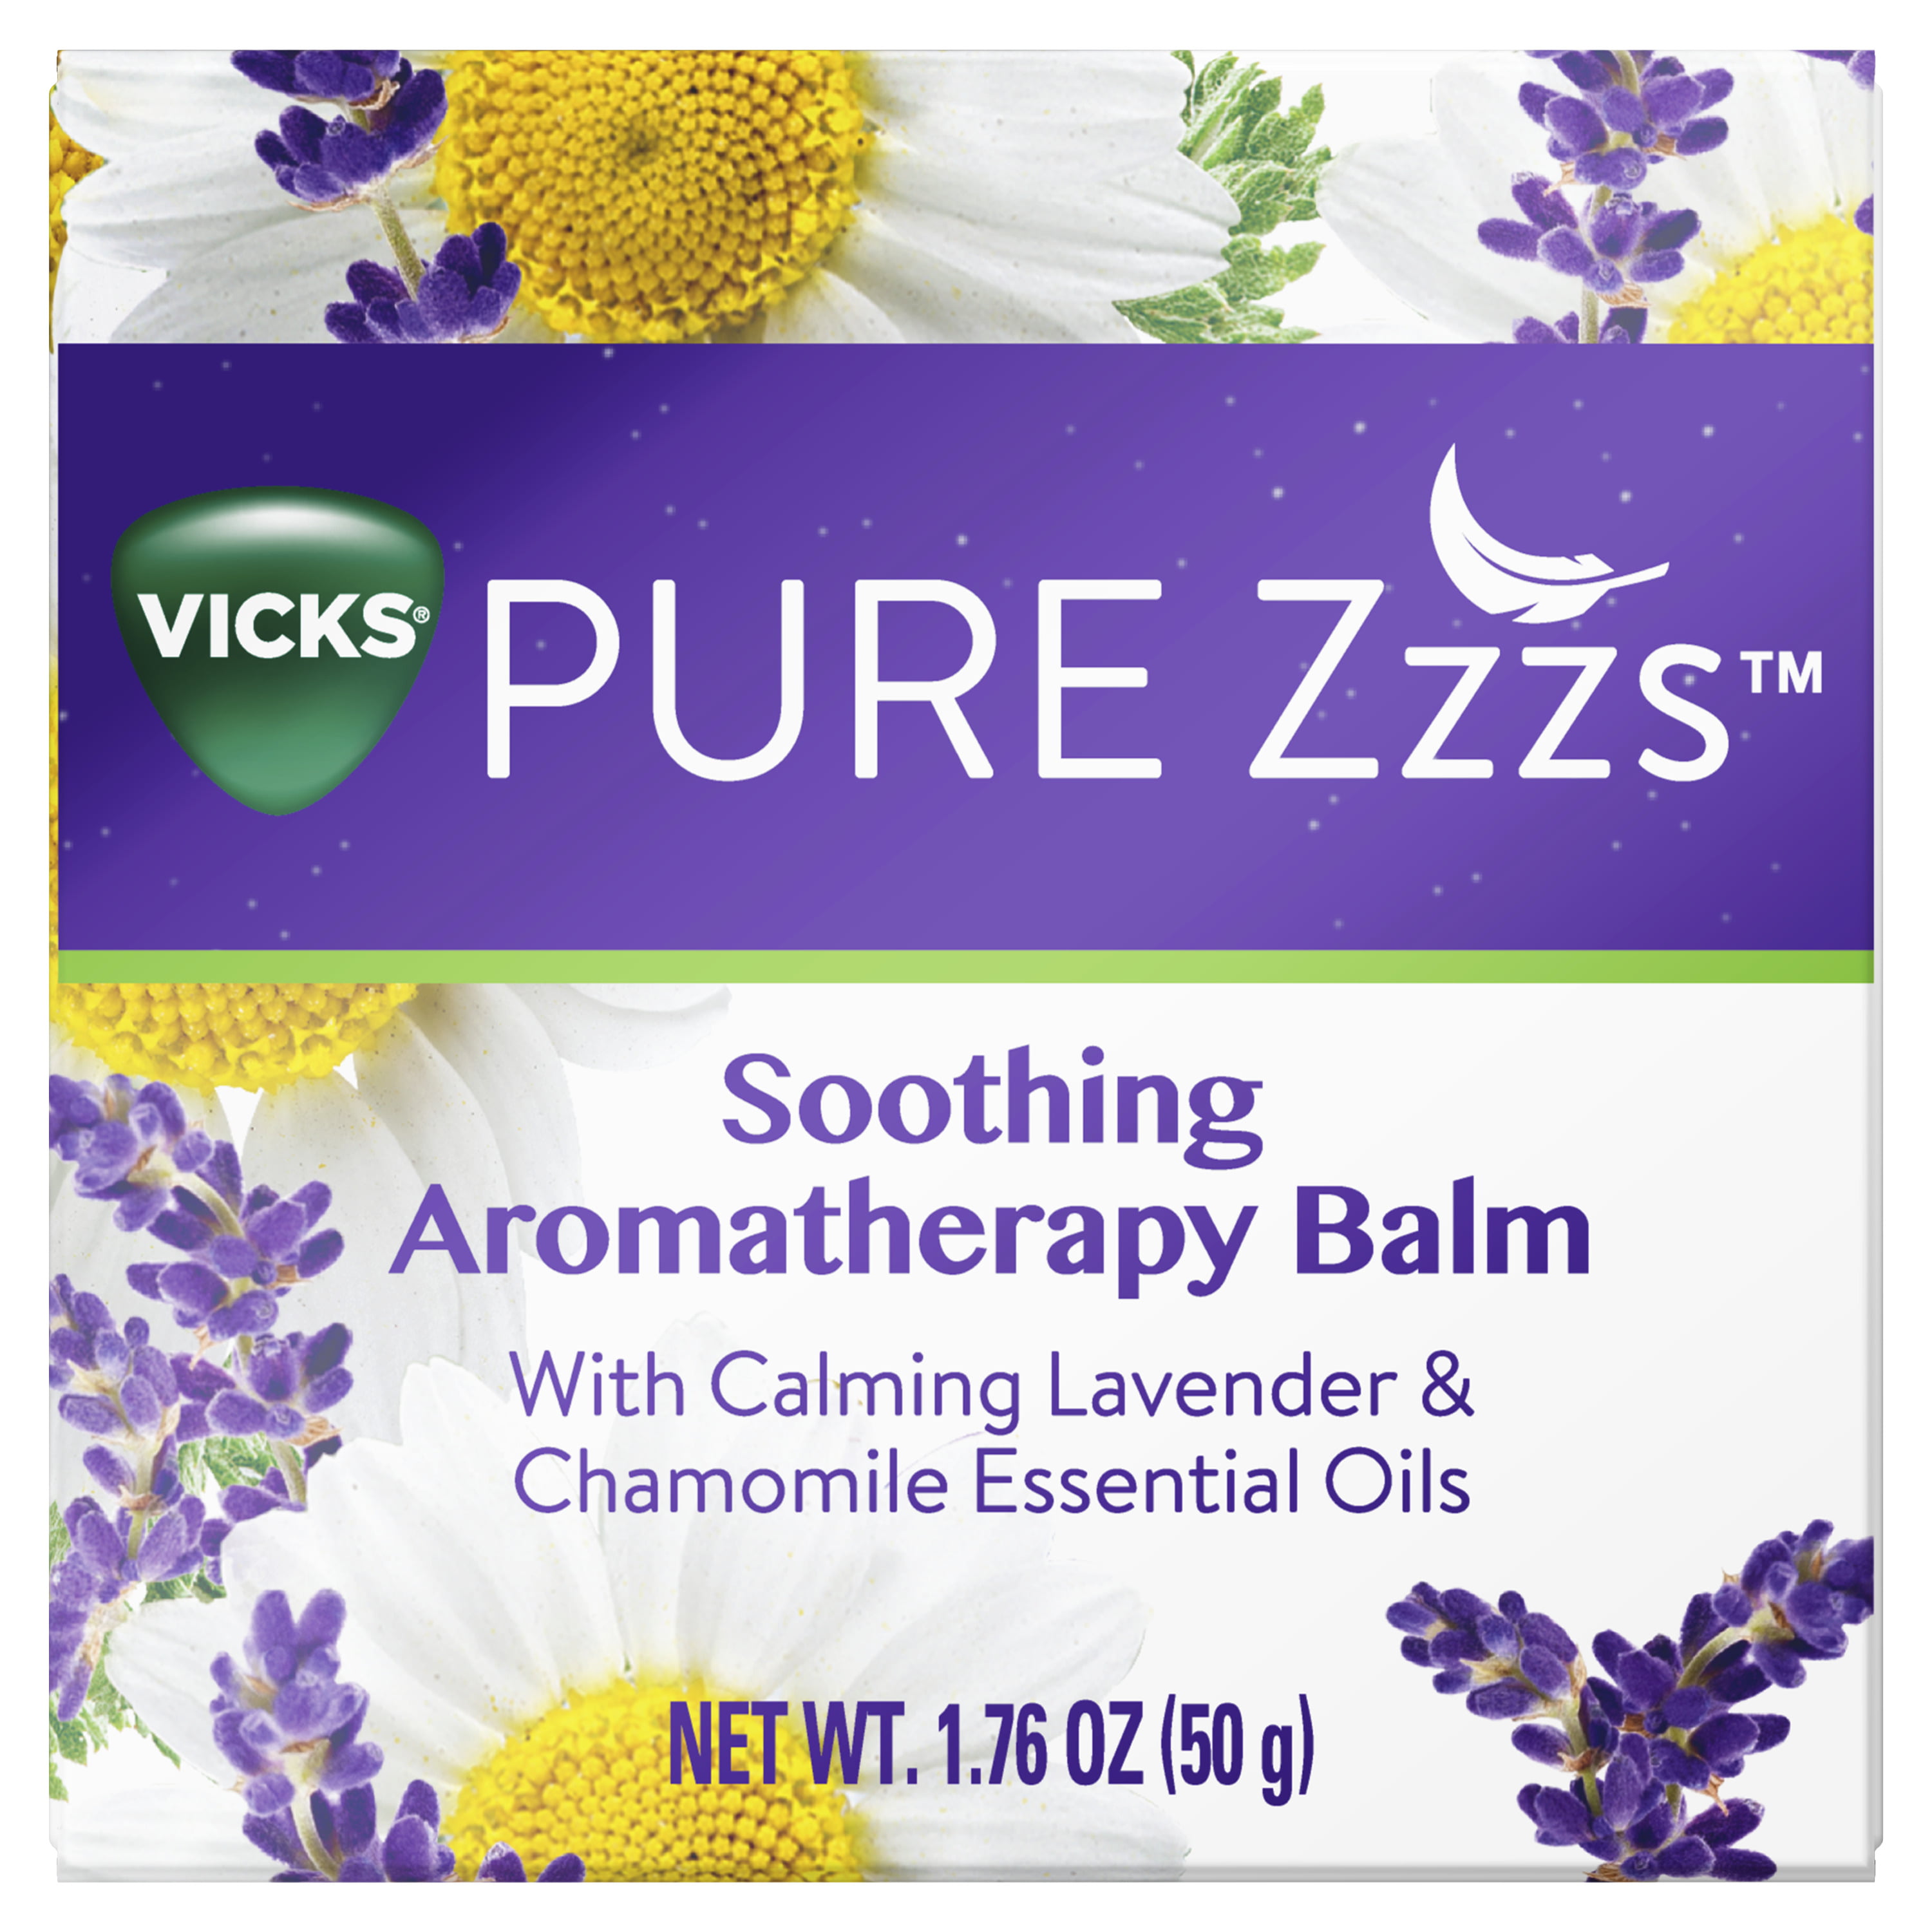 Vicks PURE Zzzs Soothing Aromatherapy Balm with Calming Lavender &  Chamomile Essential Oils, 1.76 oz - Walmart.com